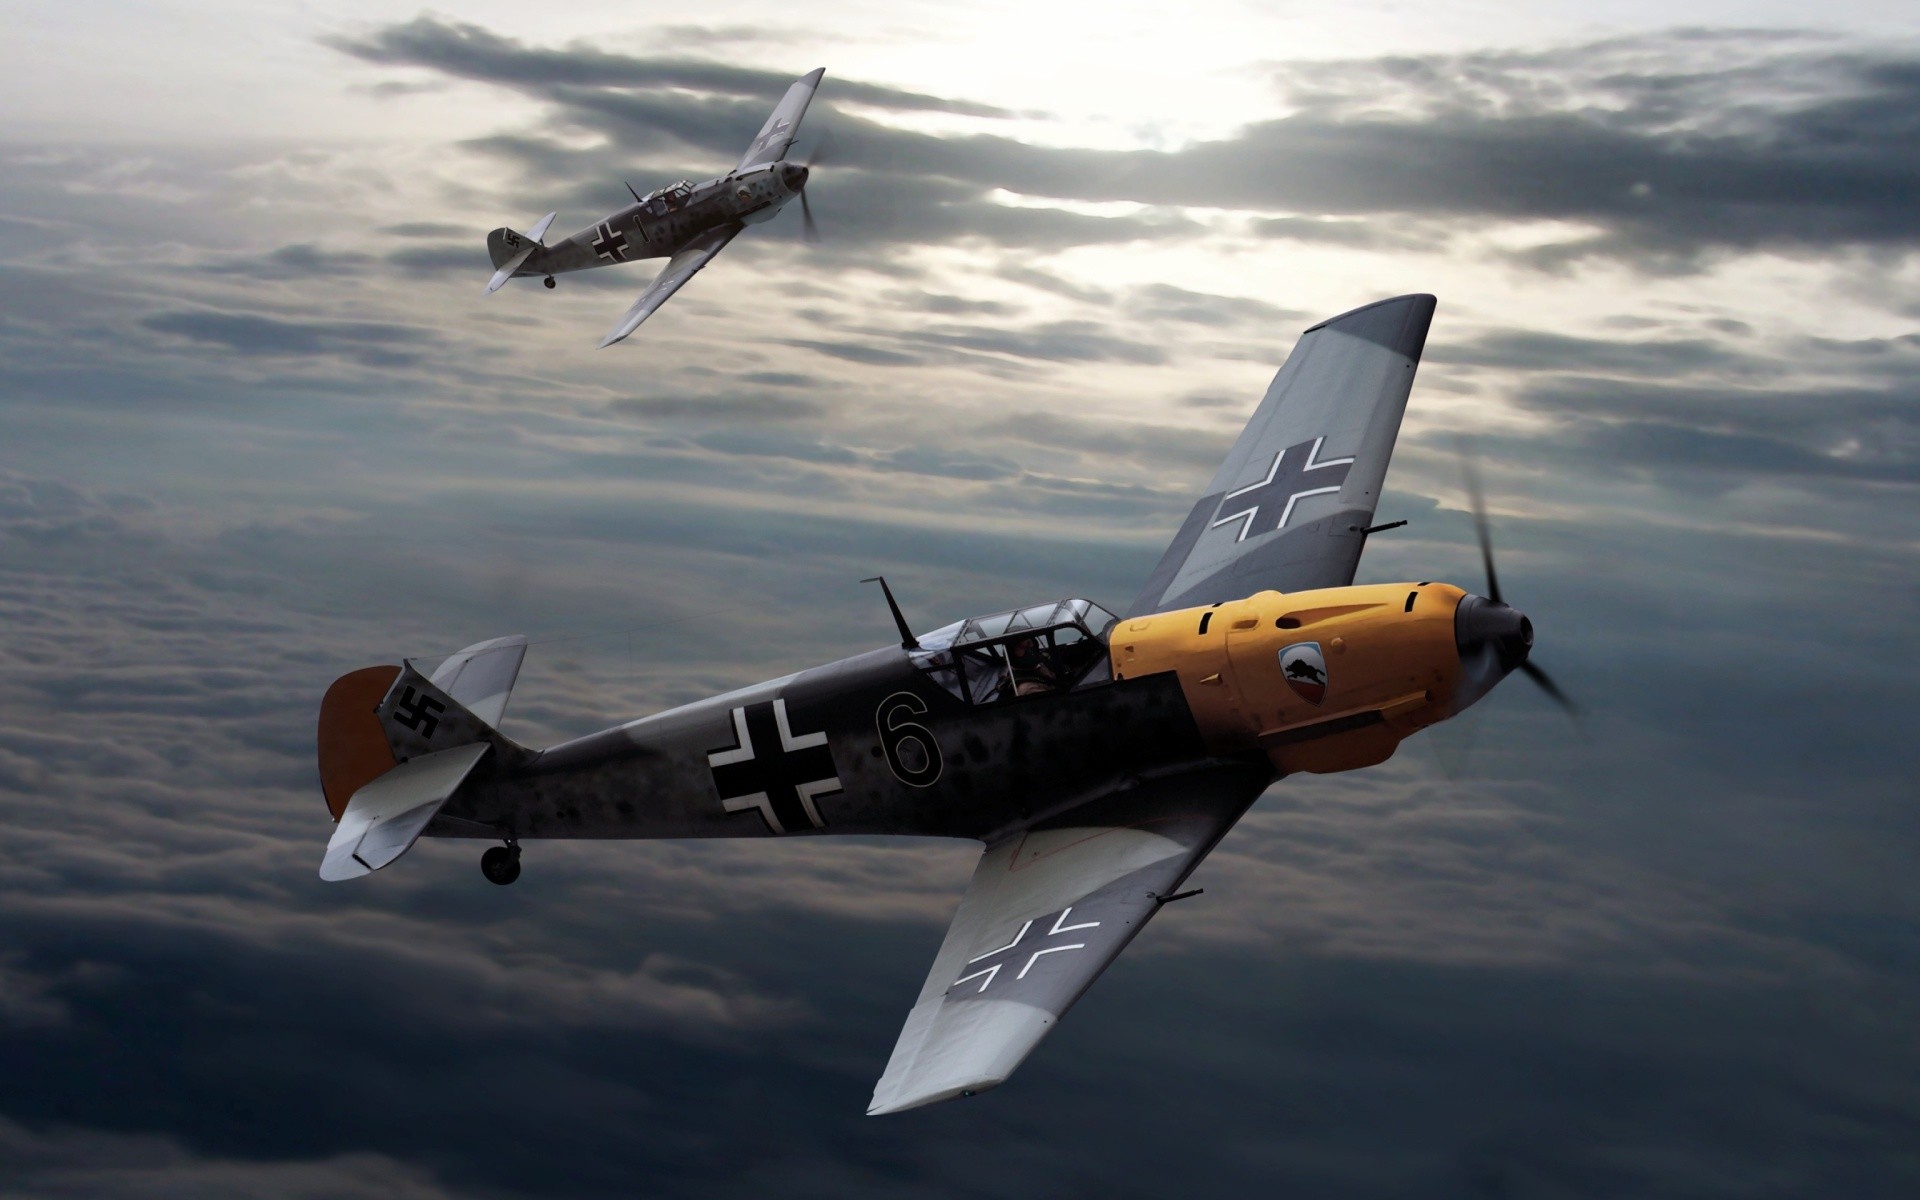 1920x1200 WWII Fighter Planes Wallpapers 1920x1080 - WallpaperSafari